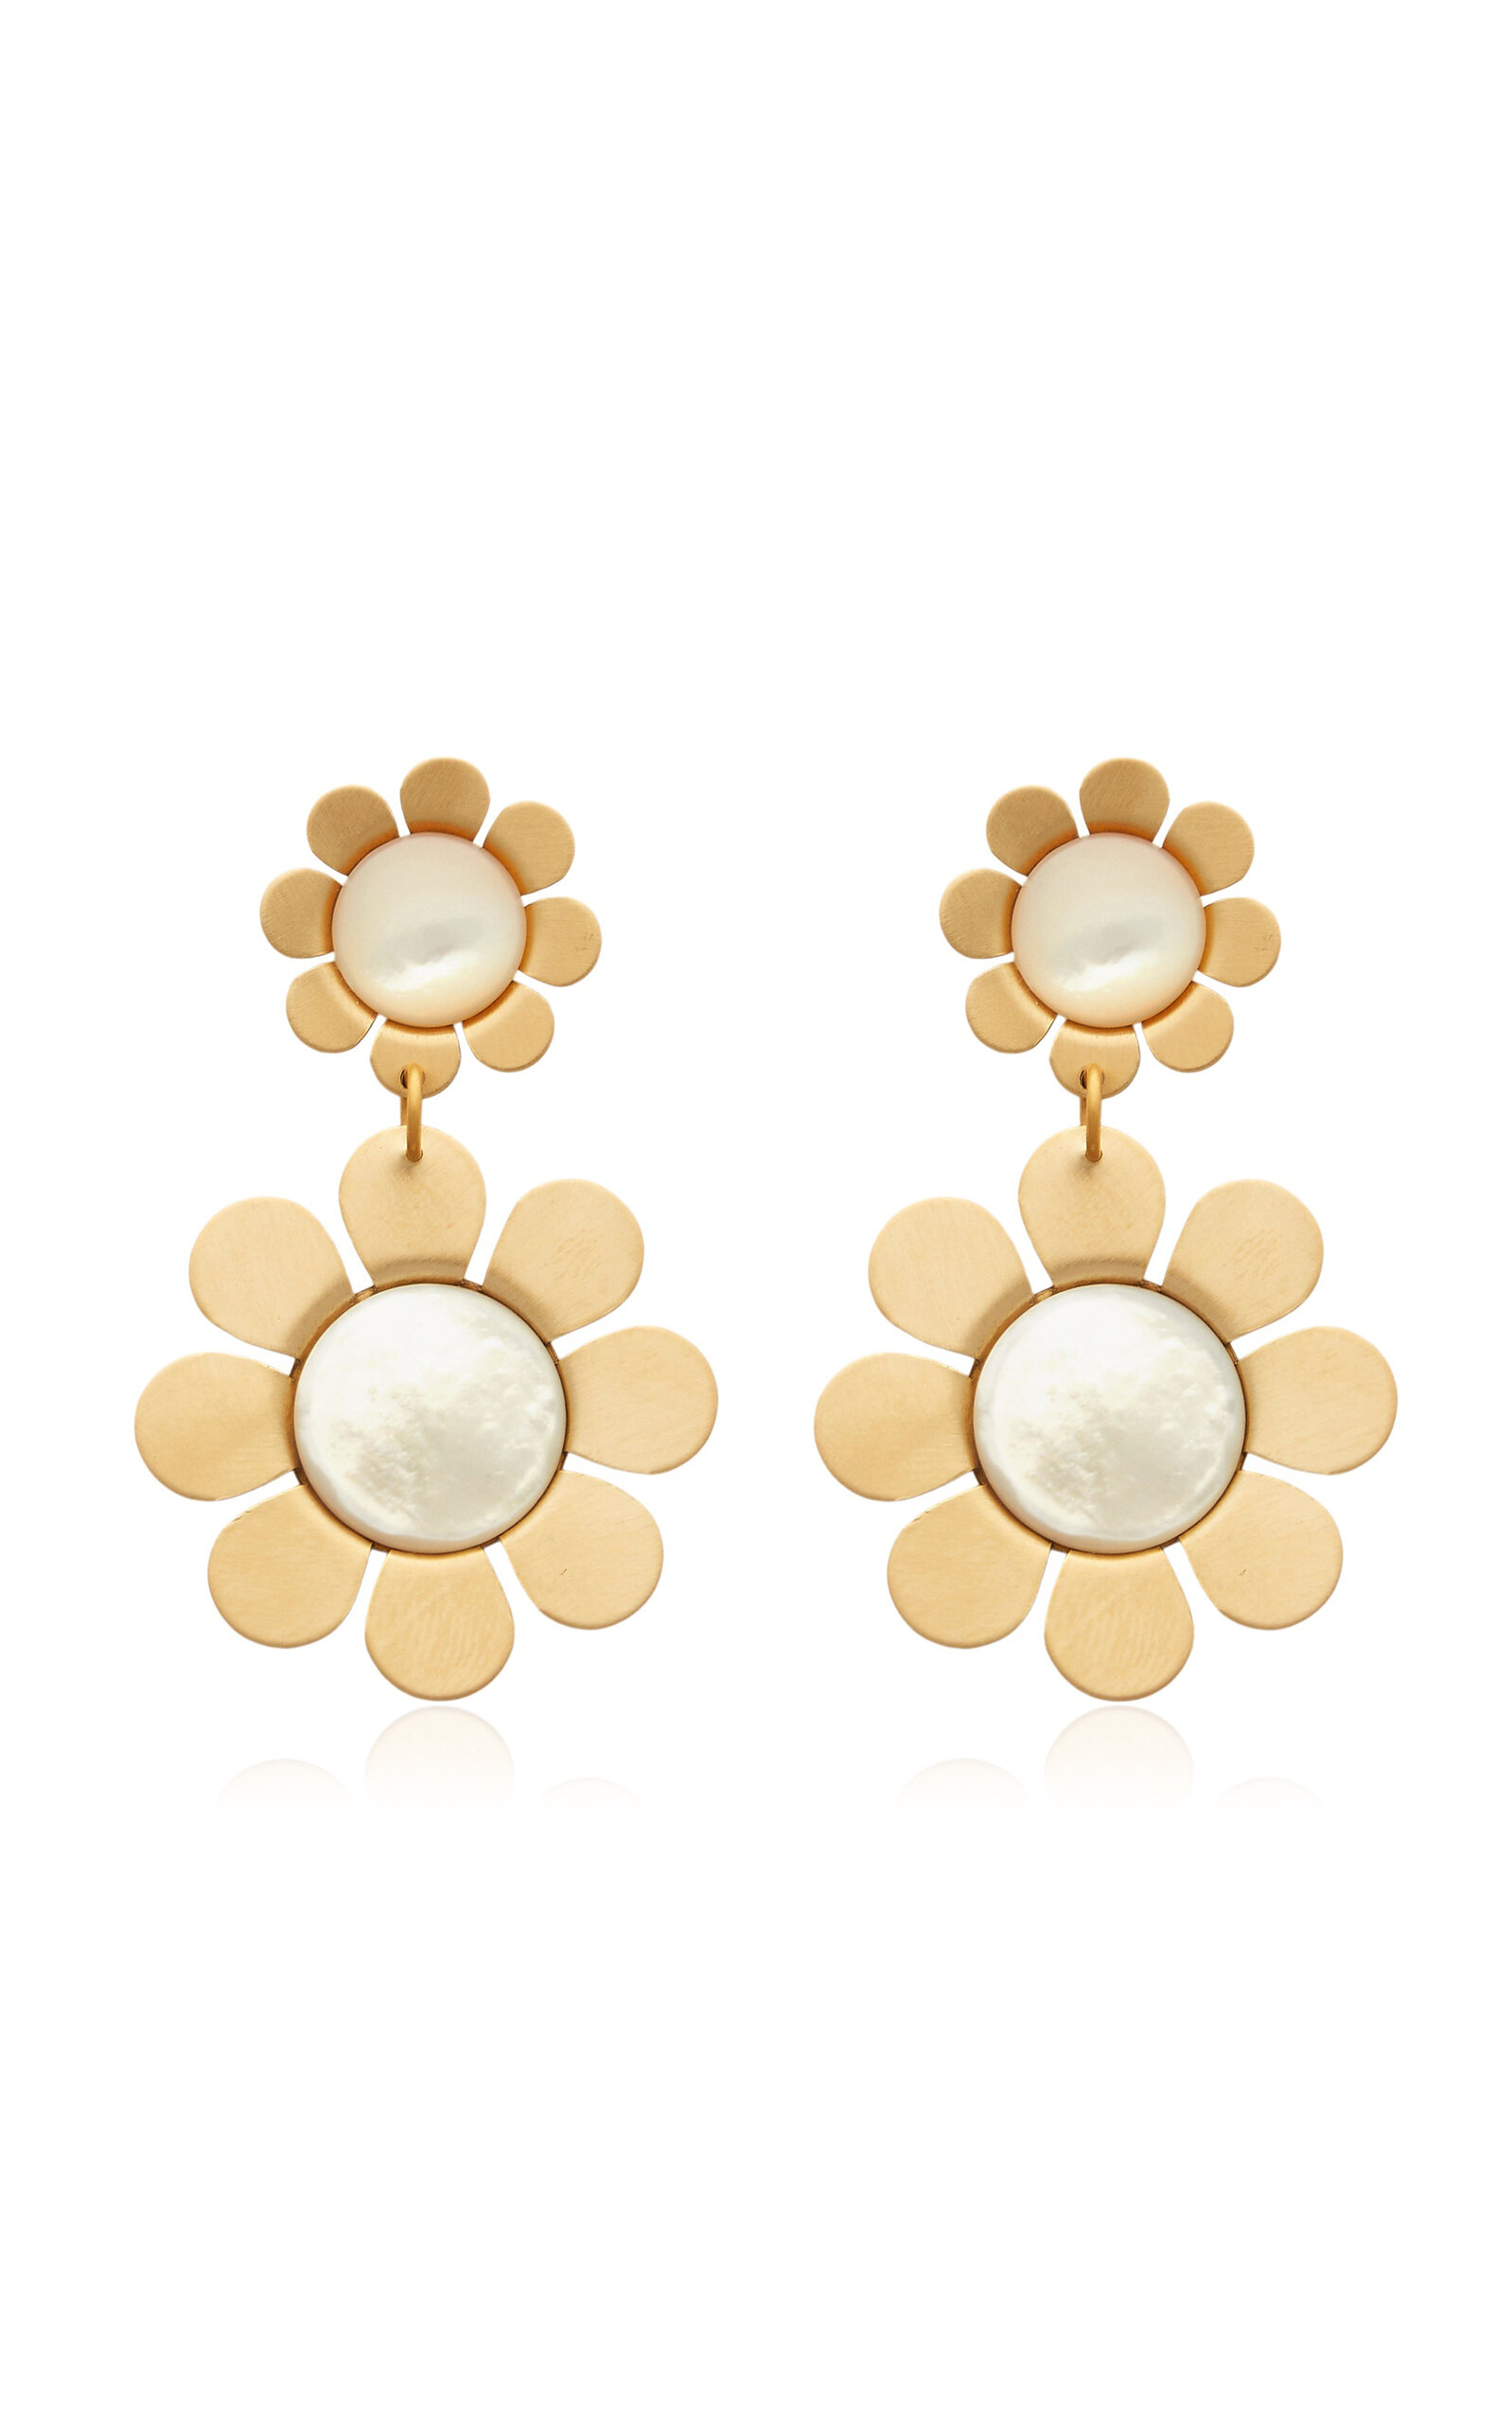 Hillie 24K Gold Plated Mother Of Pearl Earrings